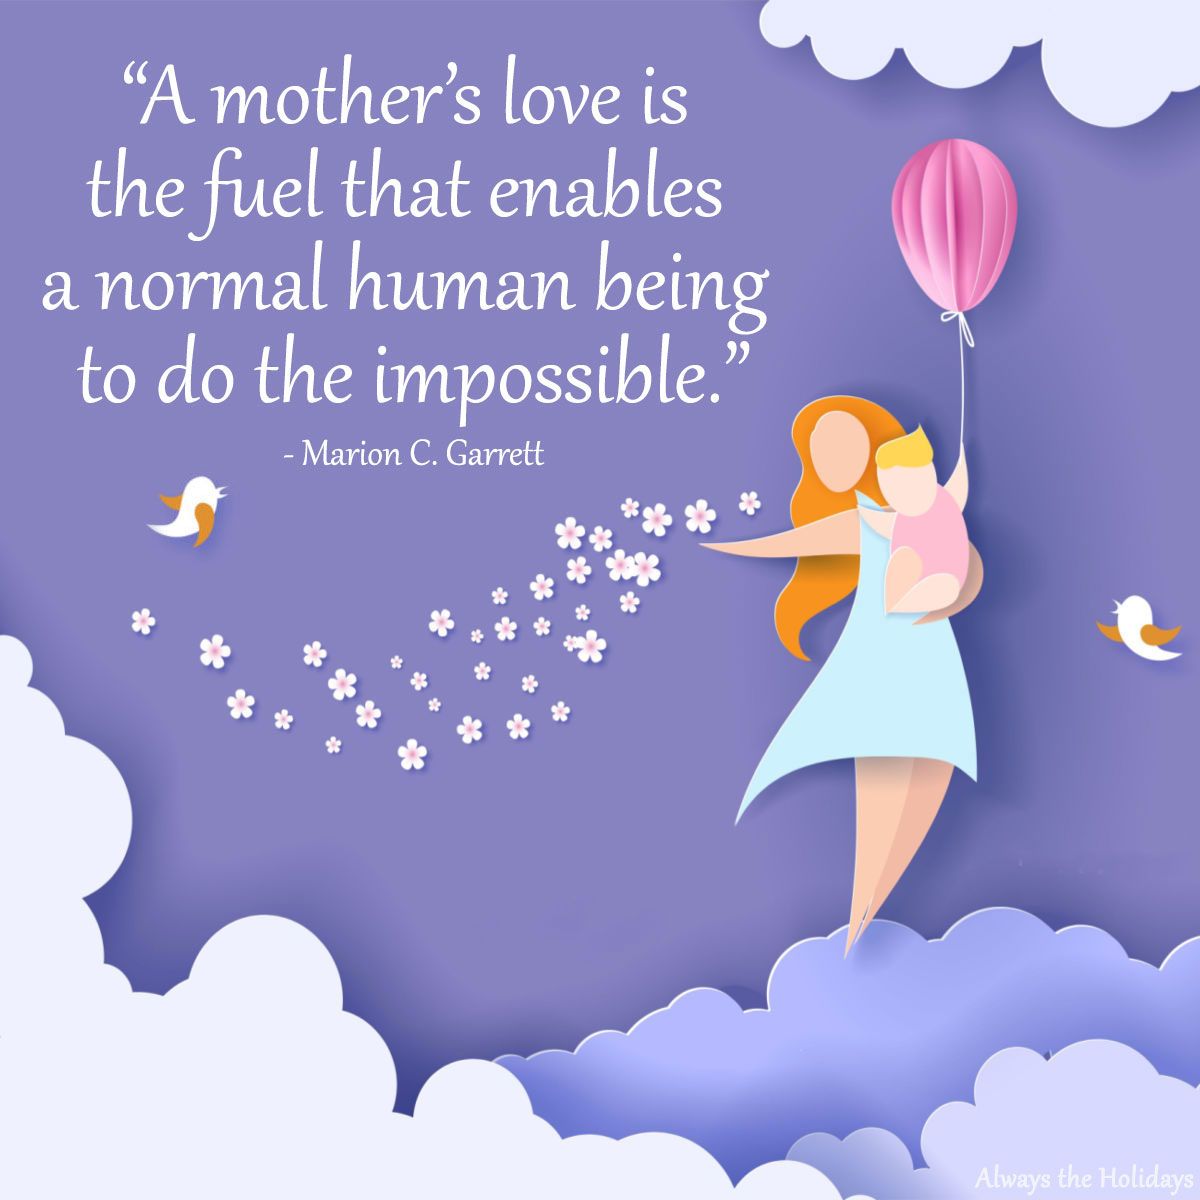 Mom quotes over the image of a purple sky with clouds, and a woman standing on the cloud, holding her baby and a balloon with flowers and birds around her.